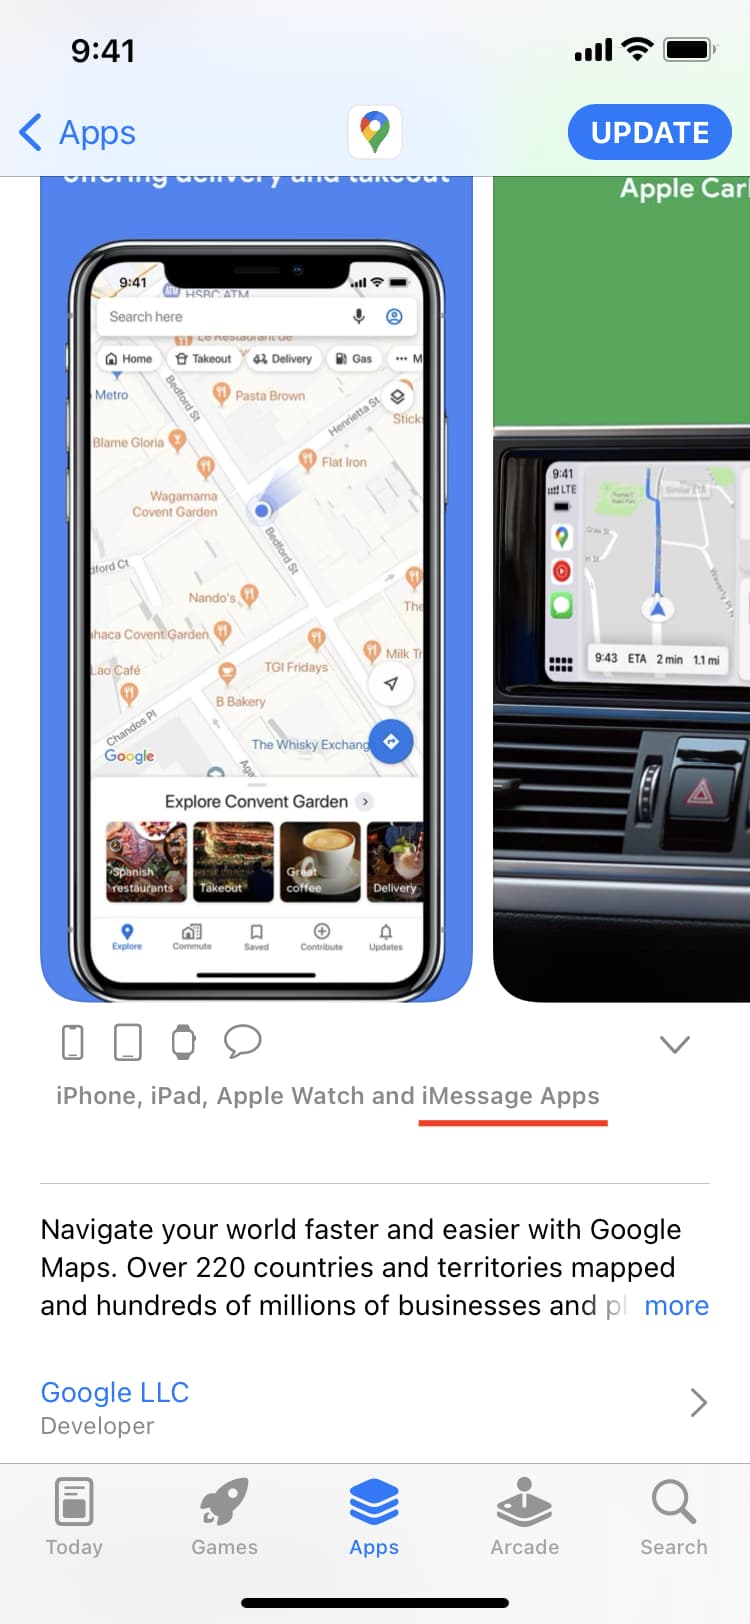 iMessage Apps on iPhone App Store